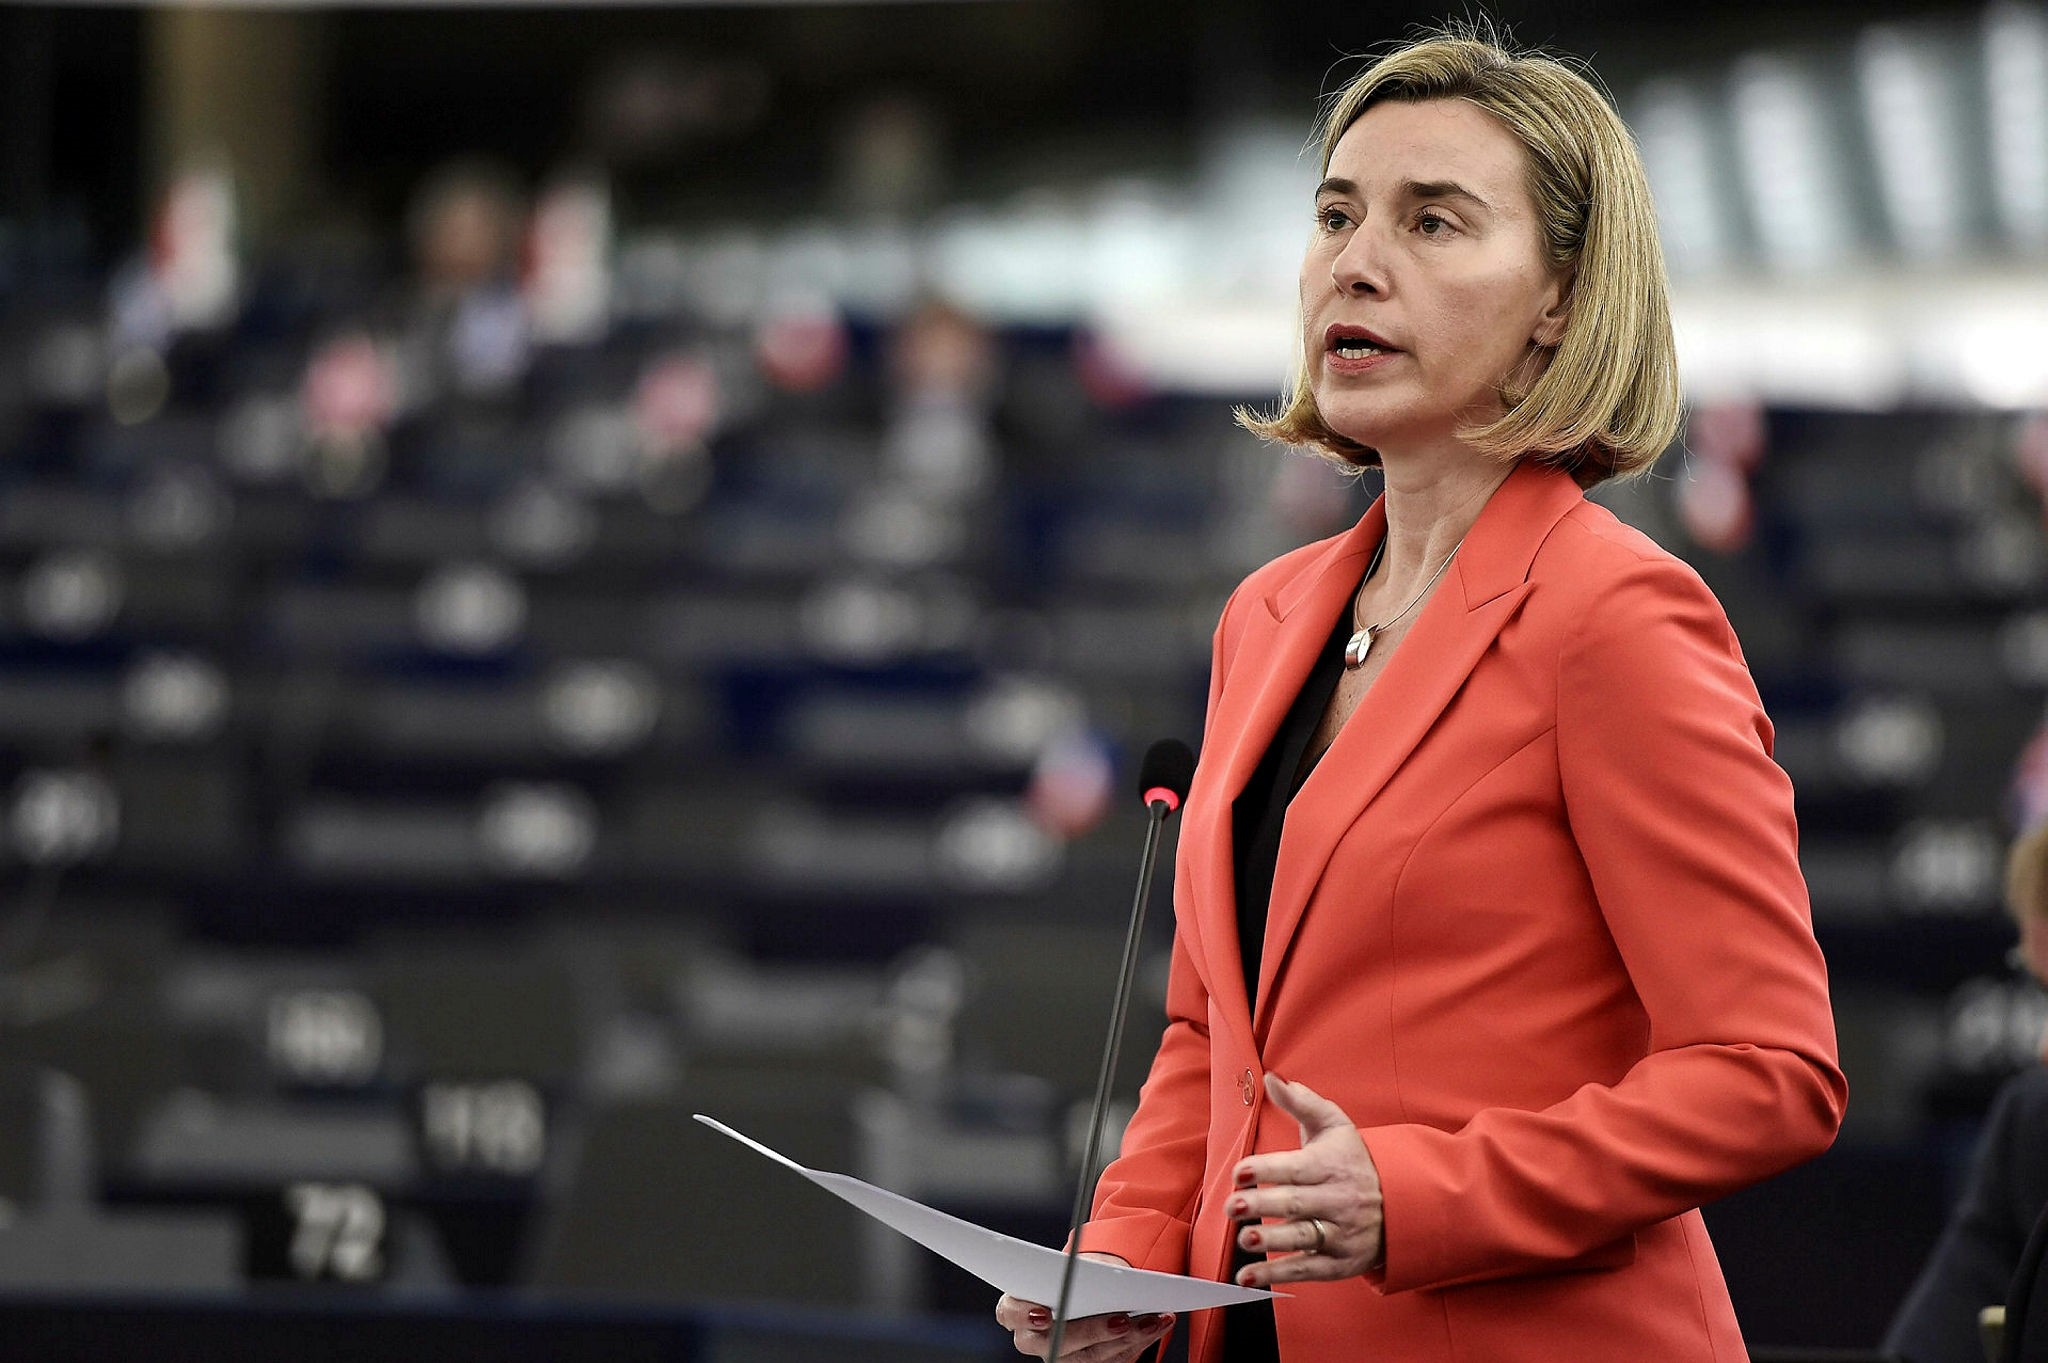 European Union foreign policy chief Federica Mogherini speaks during a debate on Syria and Turkey at the European Parliament in Strasbourg, eastern France, on November 22, 2016. (AFP Photo)